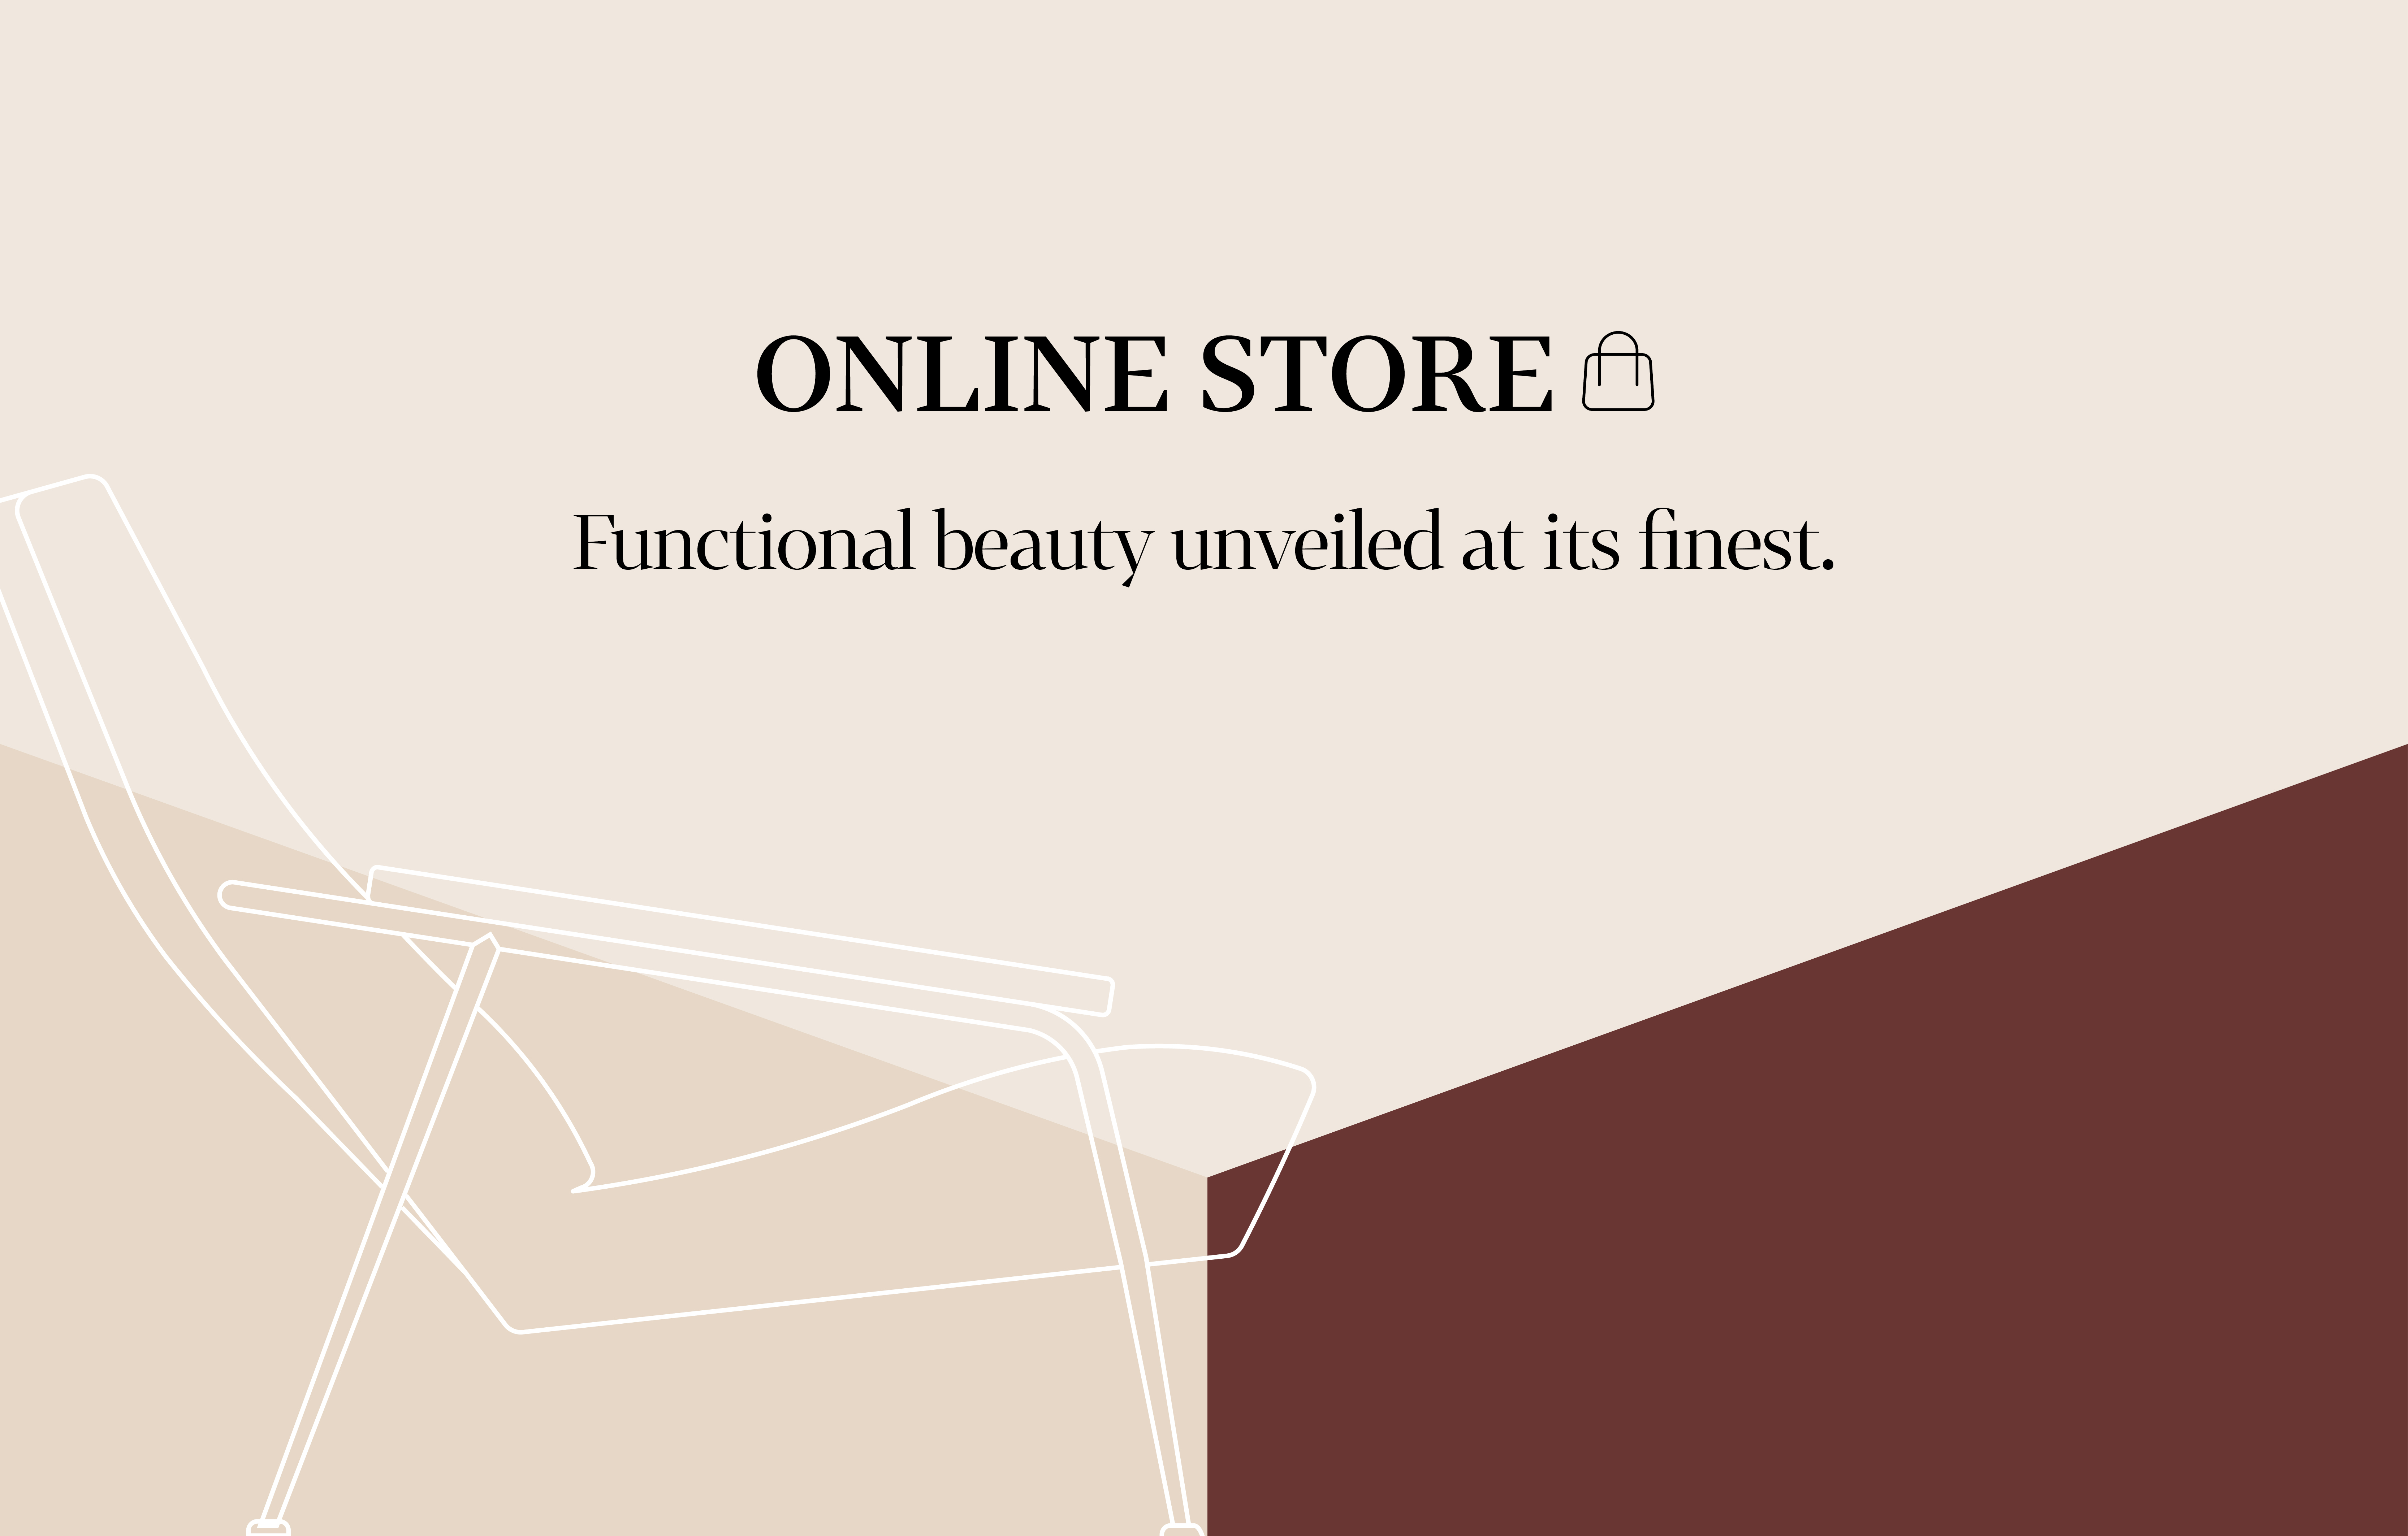 Molteni&C launches its first e-commerce platform on the US market